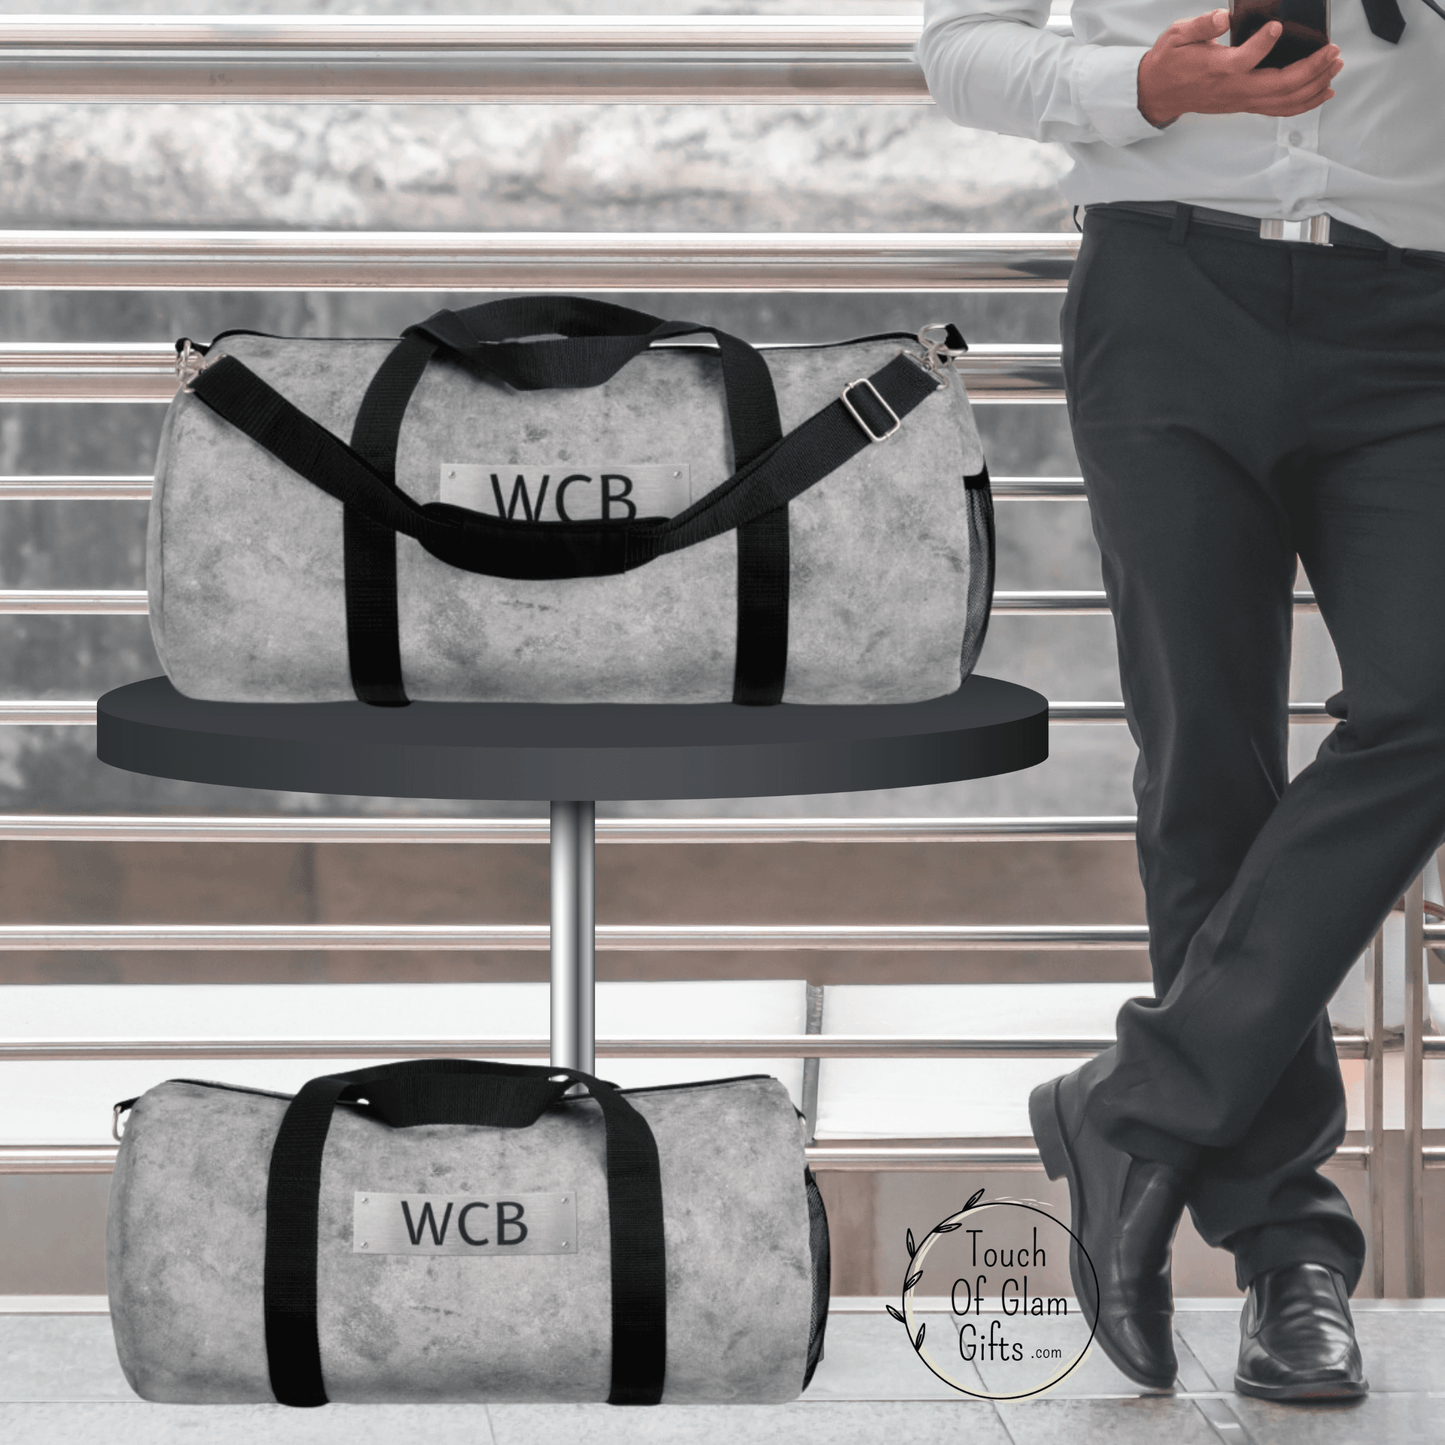 This duffel bag for men is the perfect gift for the business casual traveler. The large grey monogrammed duffel bag is on a table next to a man and the small carry on size duffel bag is on the floor.